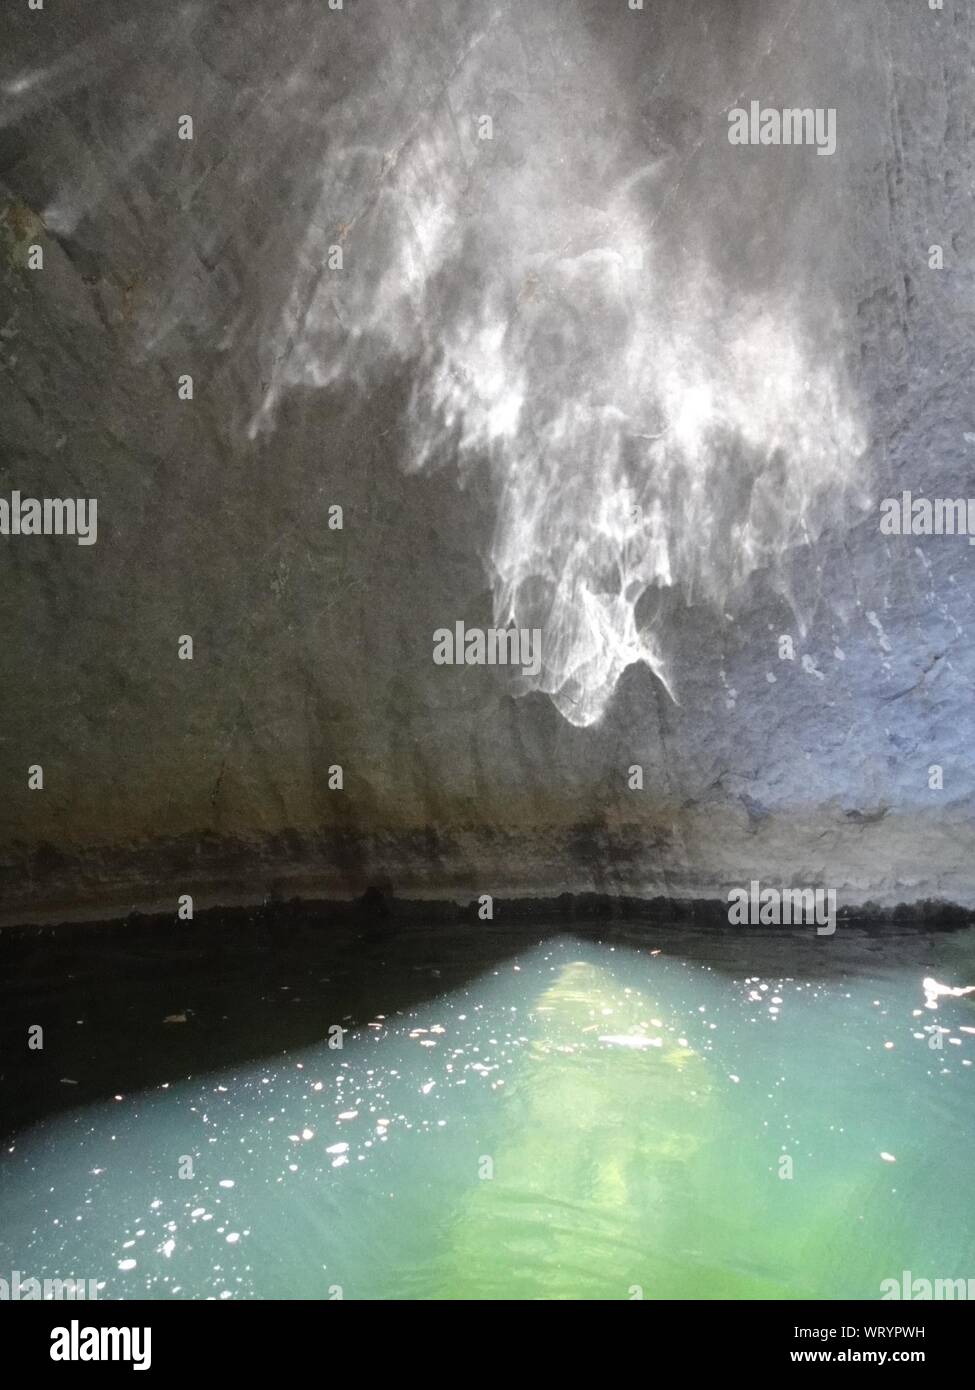 Sunlight Falling On Water In Well Stock Photo